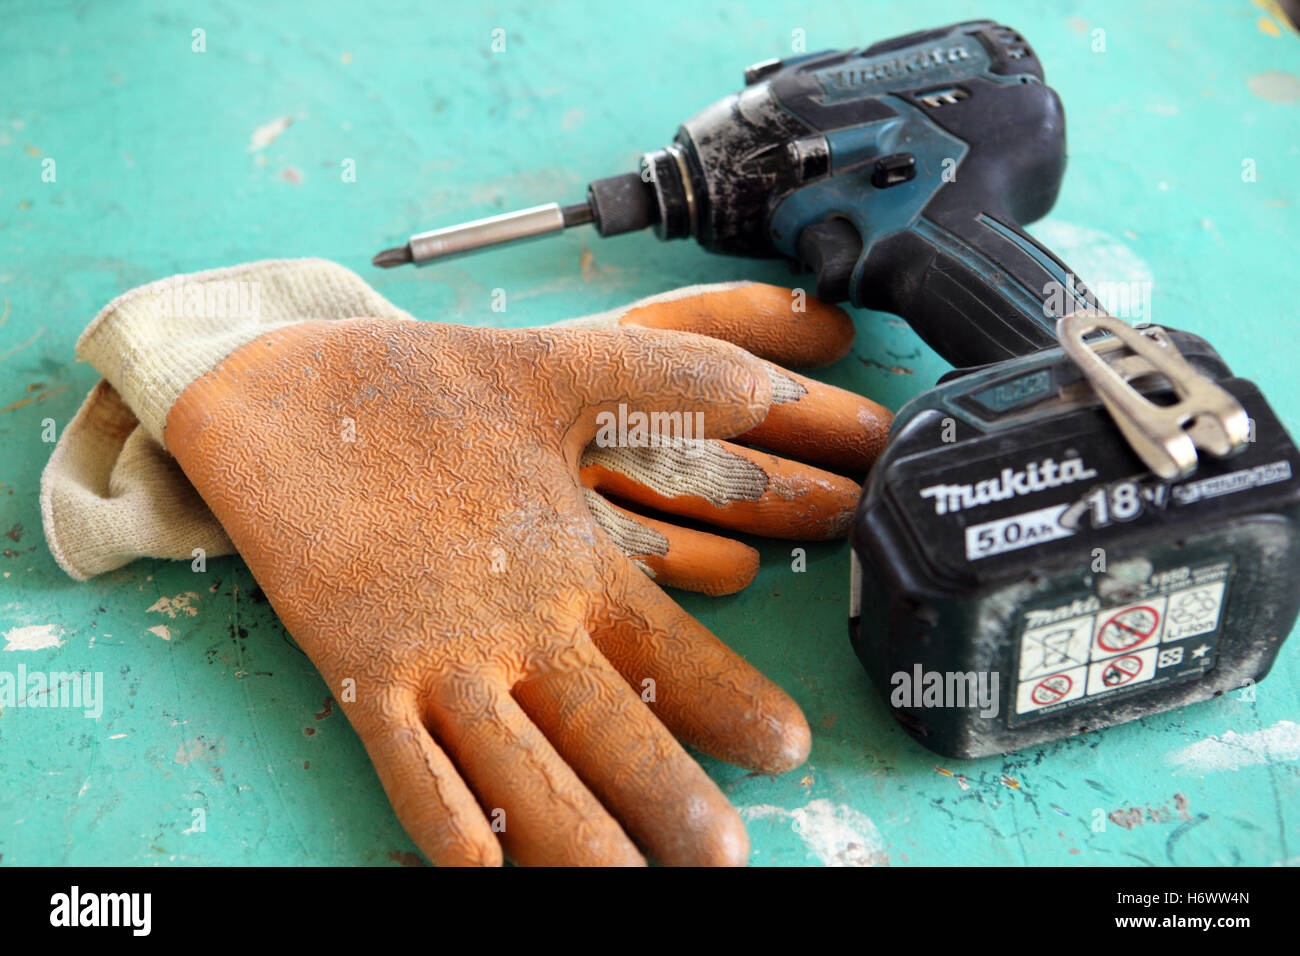 Safety gloves and drill Stock Photo